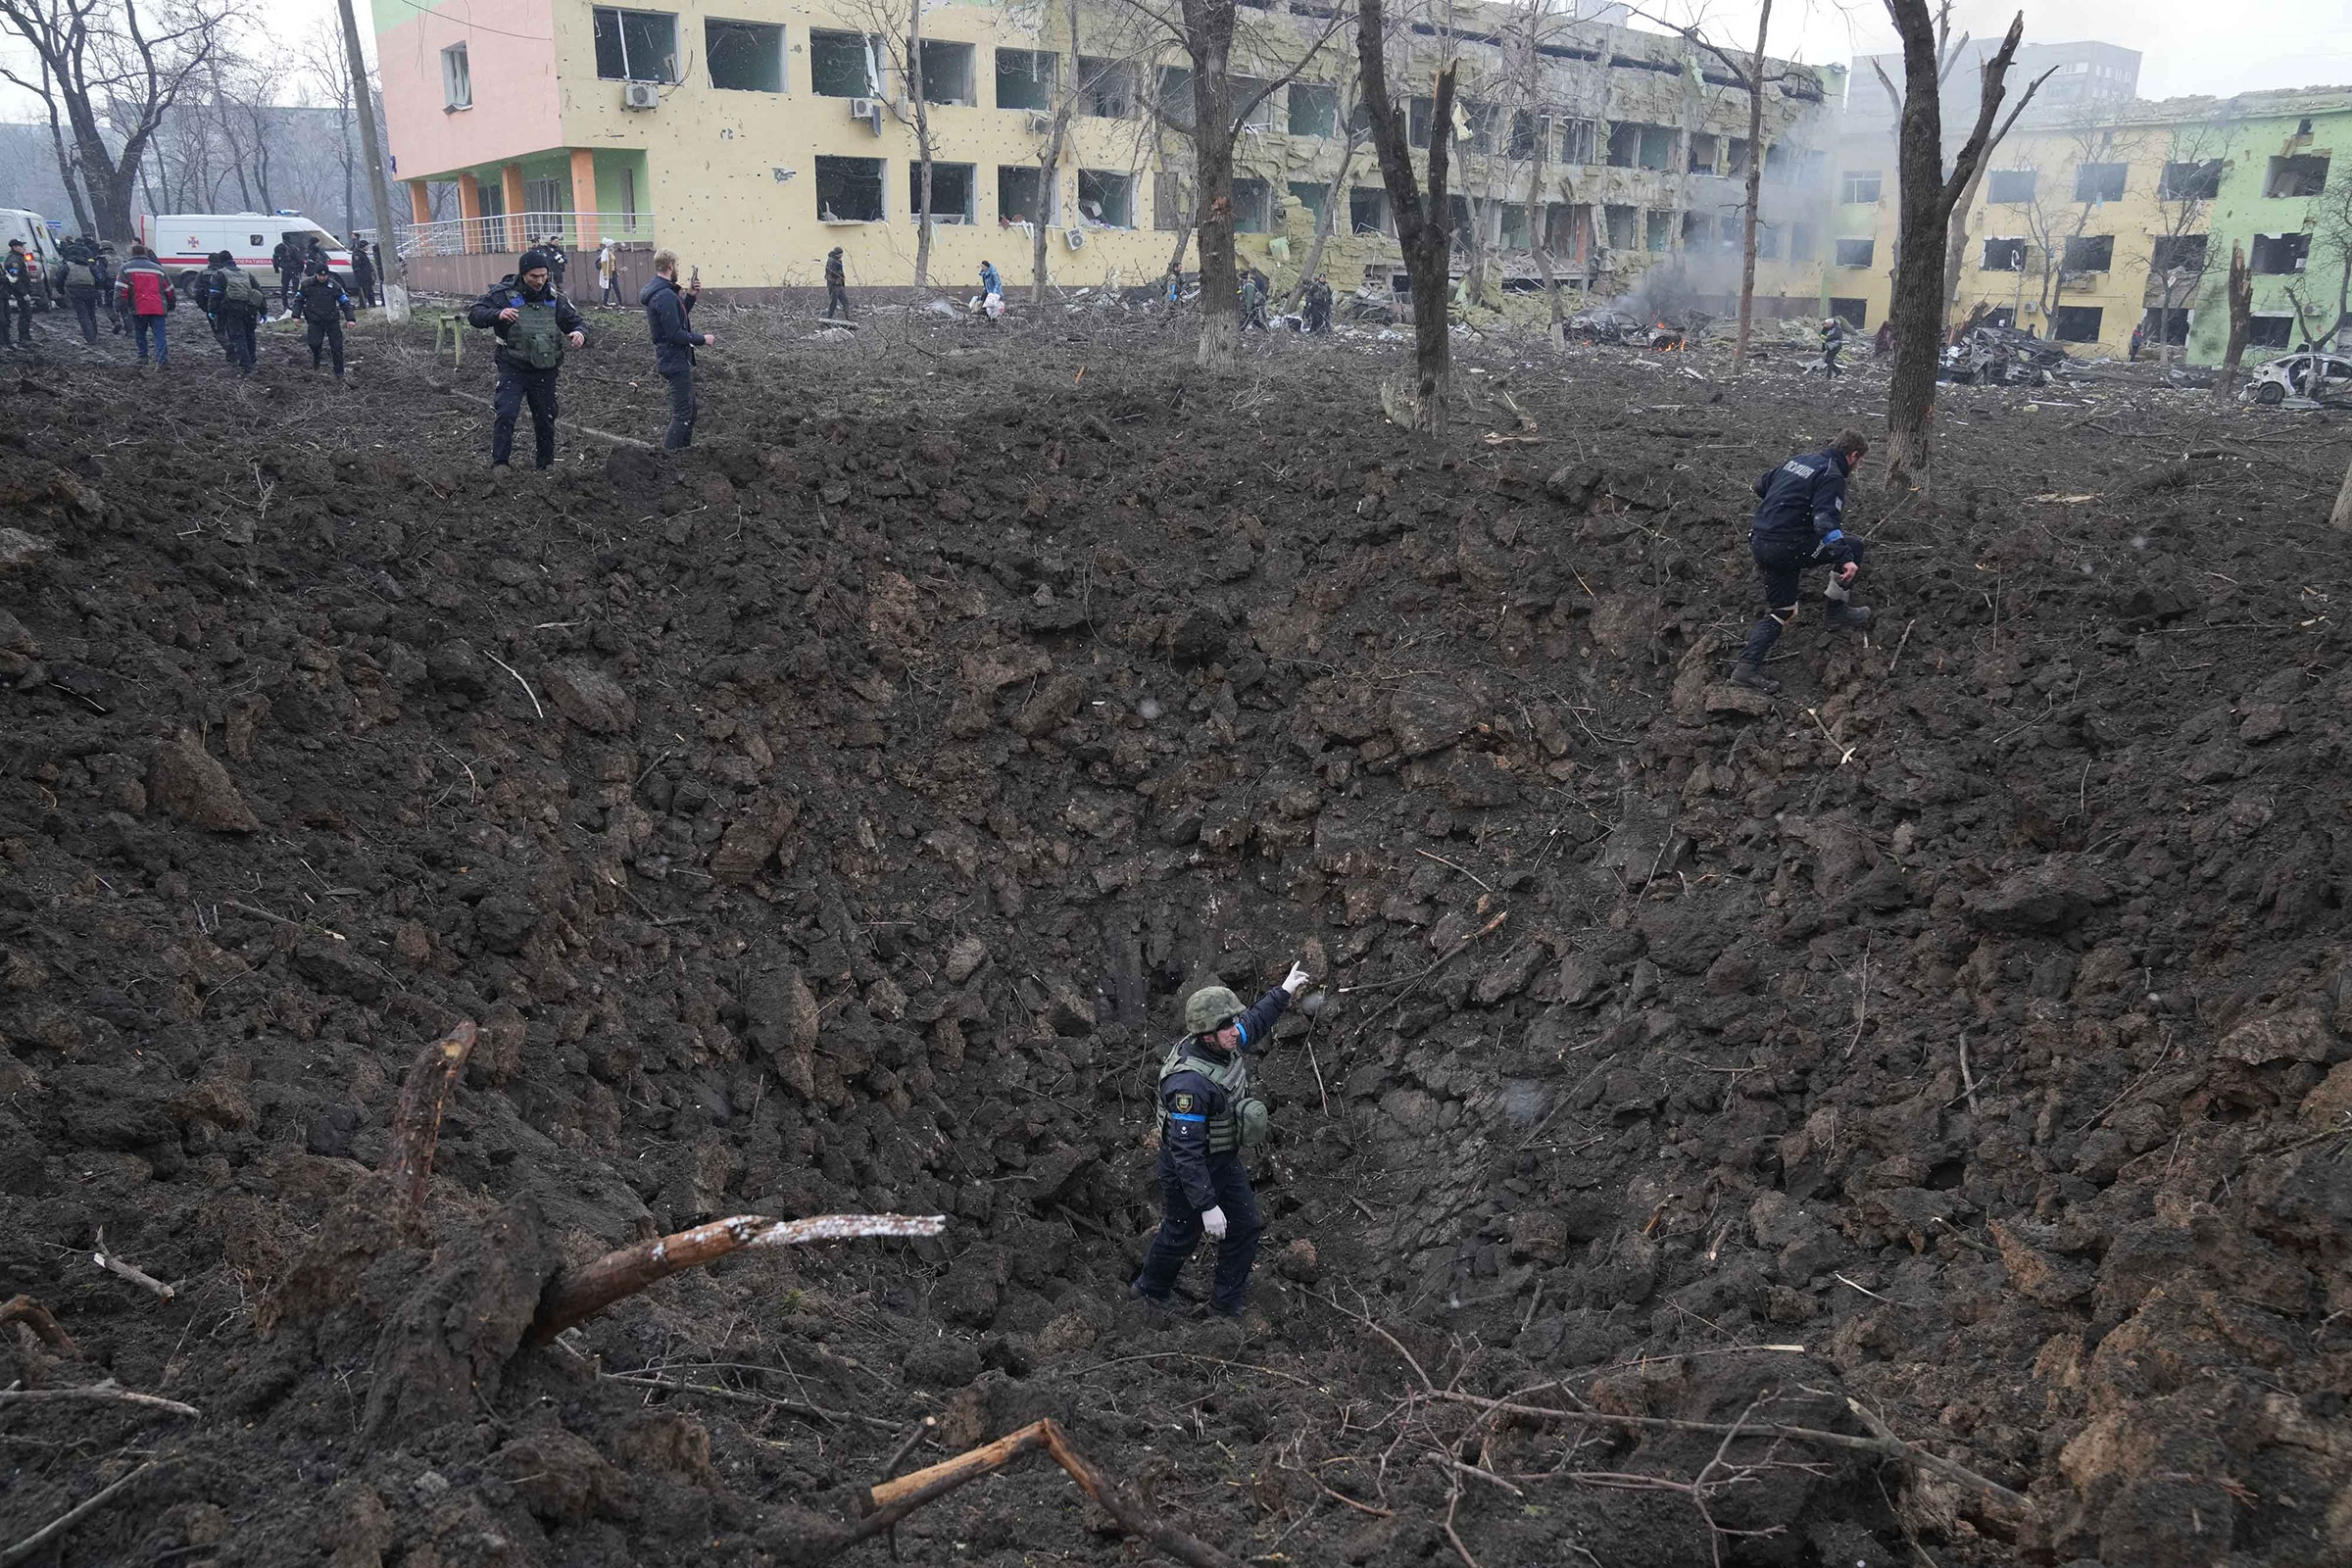 Ukrainian soldiers and emergency employees work at the site of the damaged maternity hospital in Mariupol on March 9. A Russian attack severely damaged the maternity hospital in the besieged port city of Mariupol. (Evgeniy Maloletka—AP)